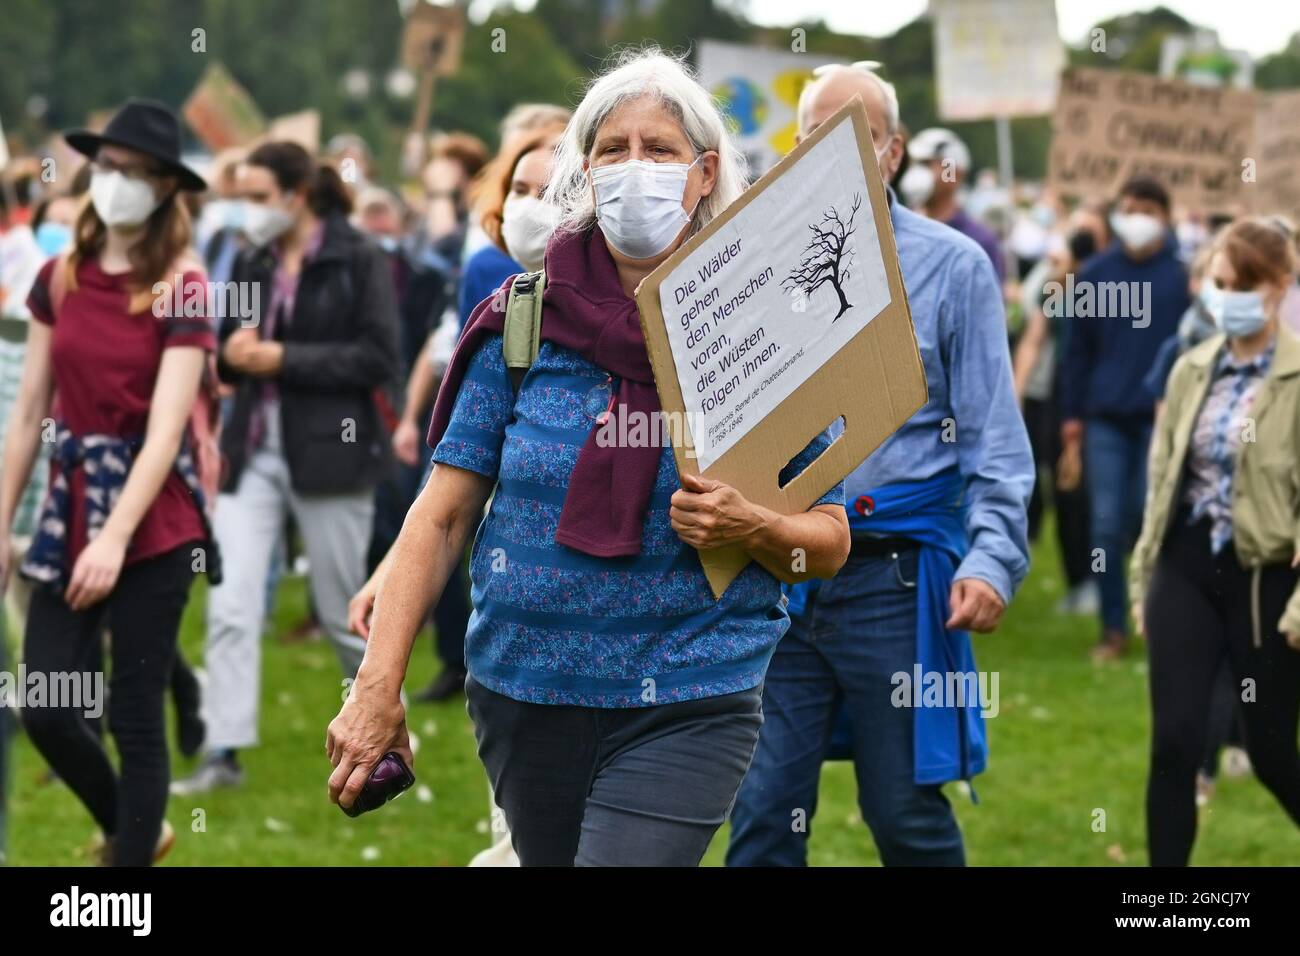 Heidelberg, Germany - 24th September 2021: Elderly lady with protest sign at Global Climate Strike demonstration Stock Photo